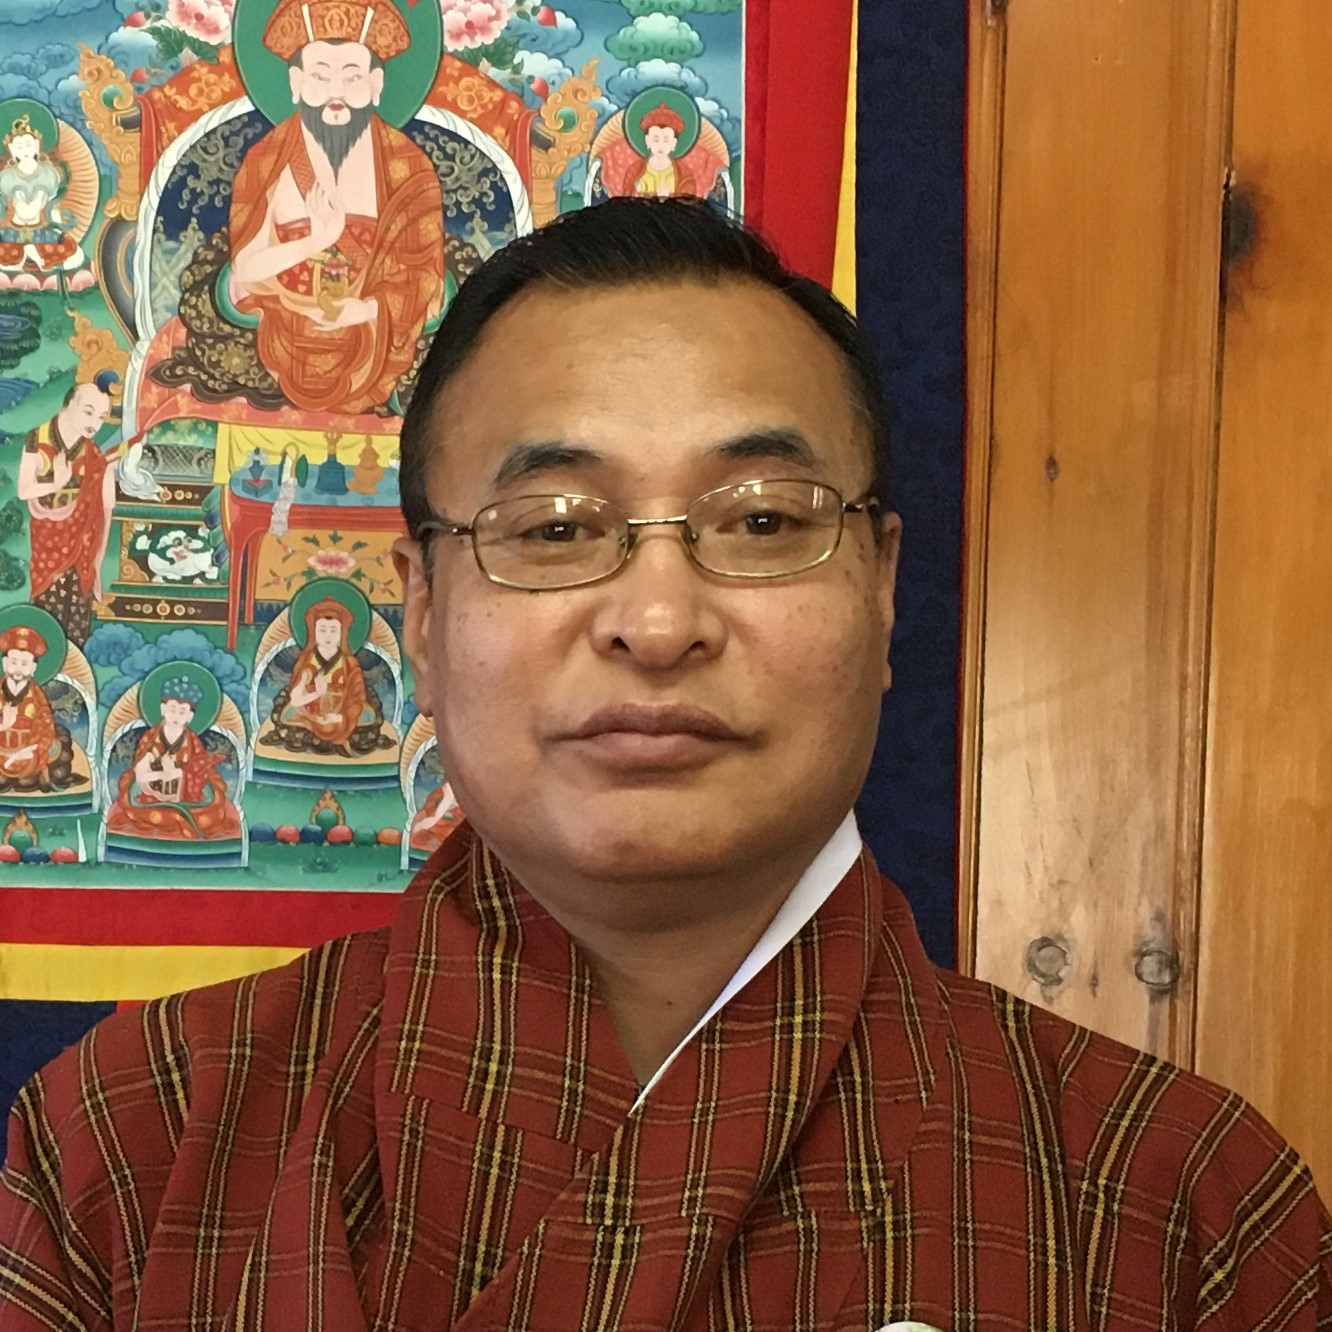 New Auditor General Appointed to Bhutan’s Royal Audit Authority